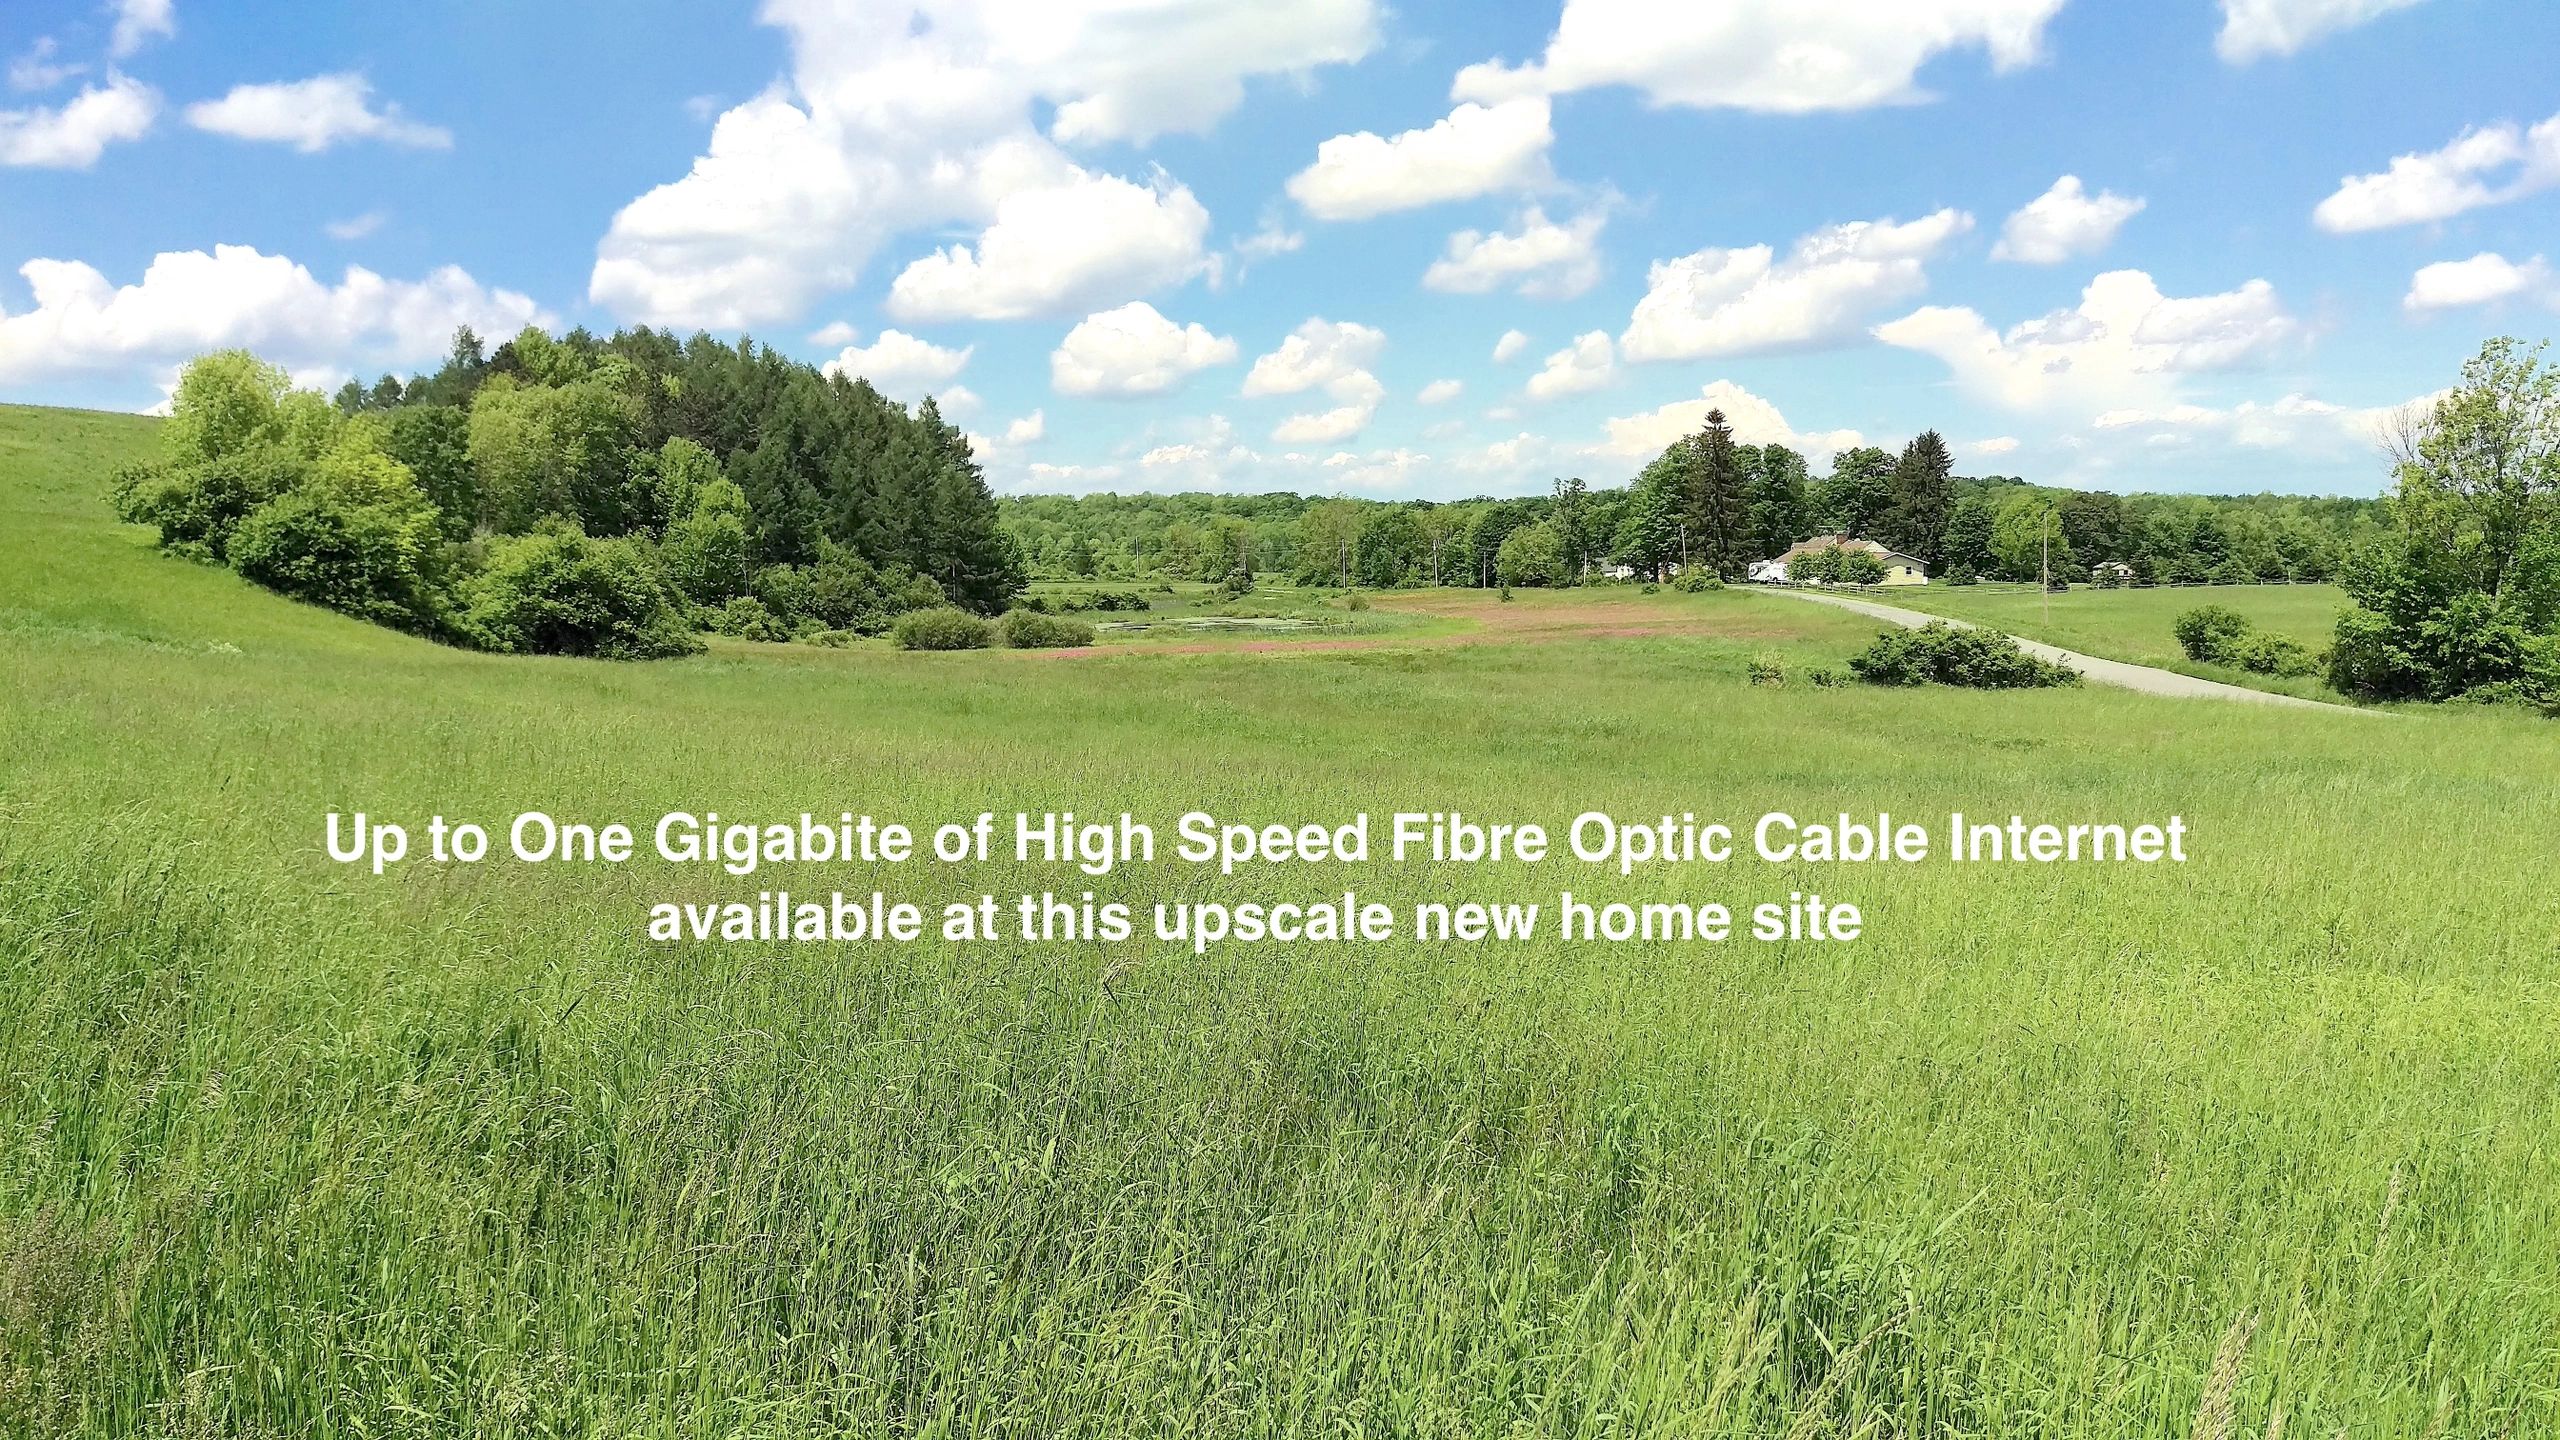 Land for sale Cooperstown NY 13.25 Acres residential building parcel lot 2 ponds 1,800' road front